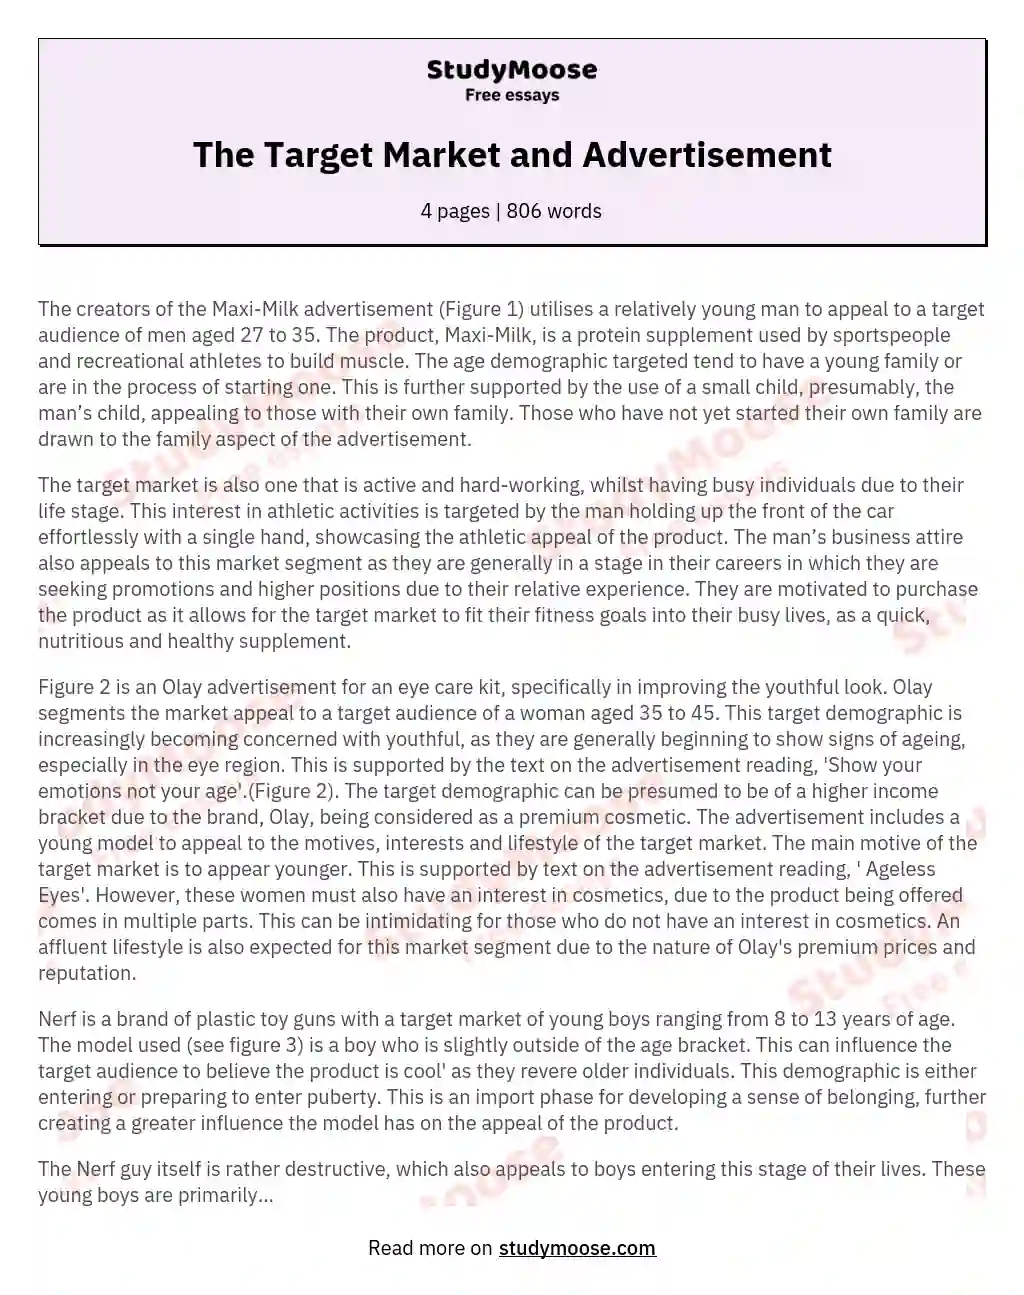 The Target Market and Advertisement essay